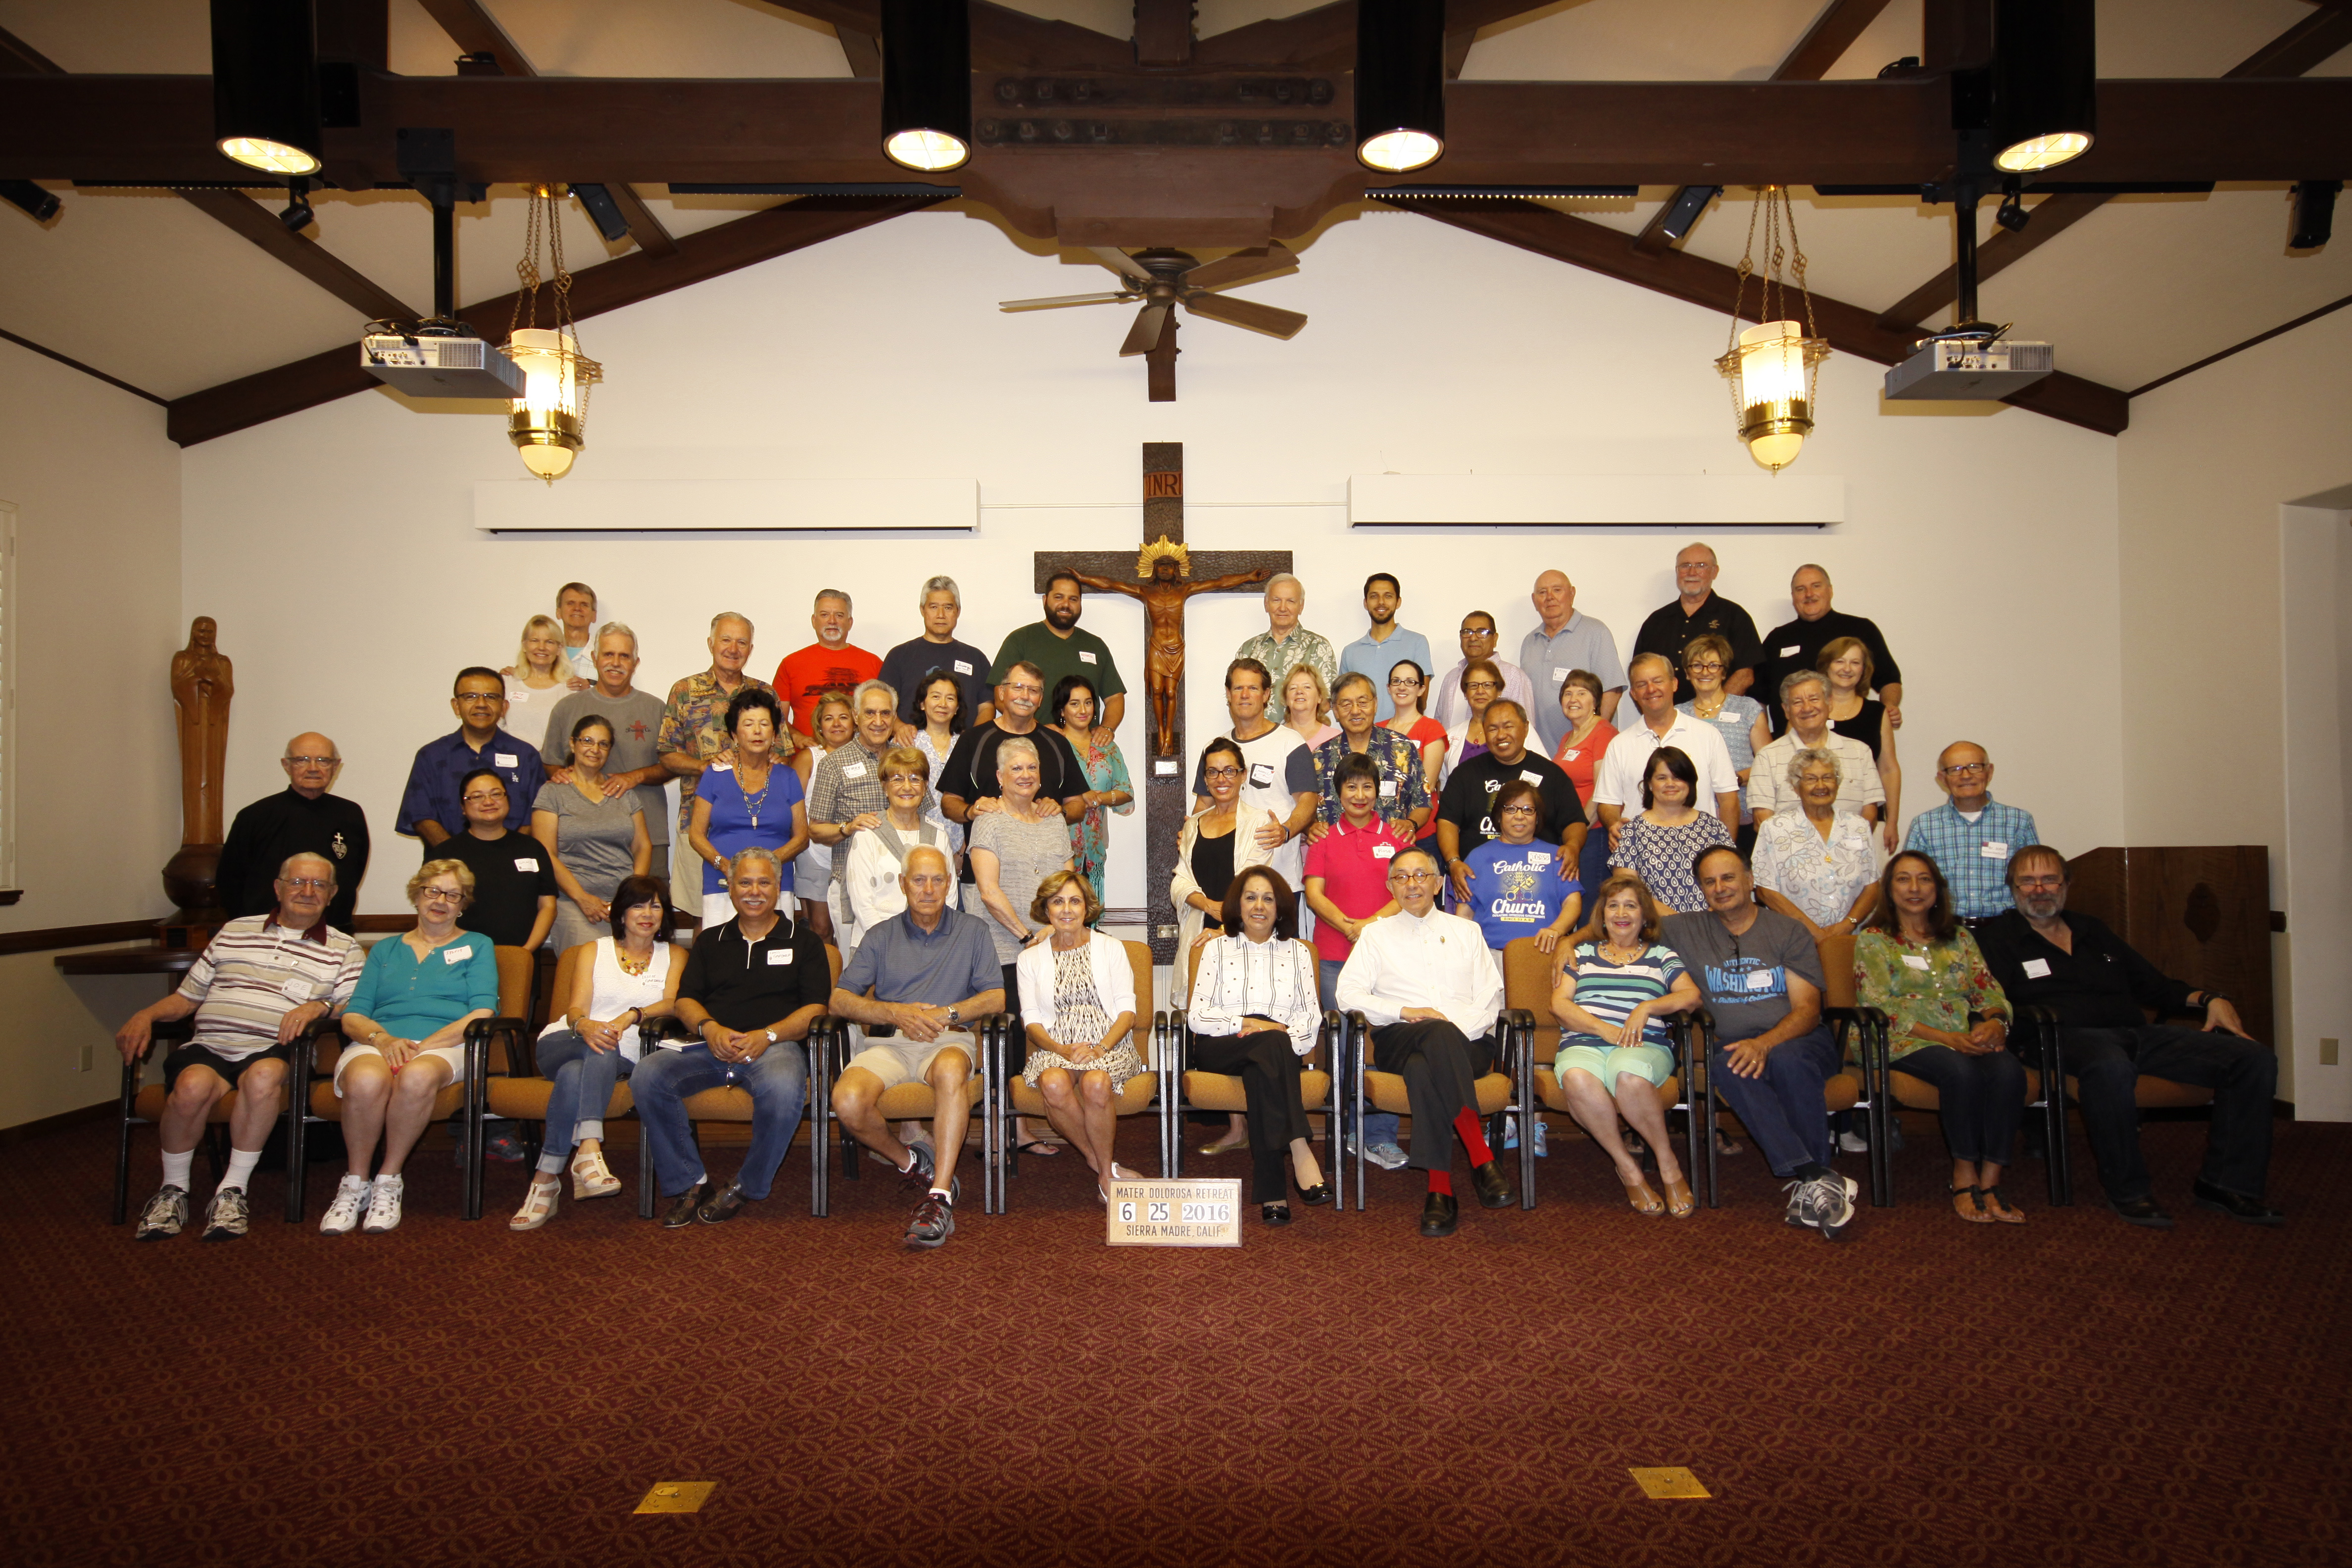 Married Couples’ Retreat, June 24-26, 2016